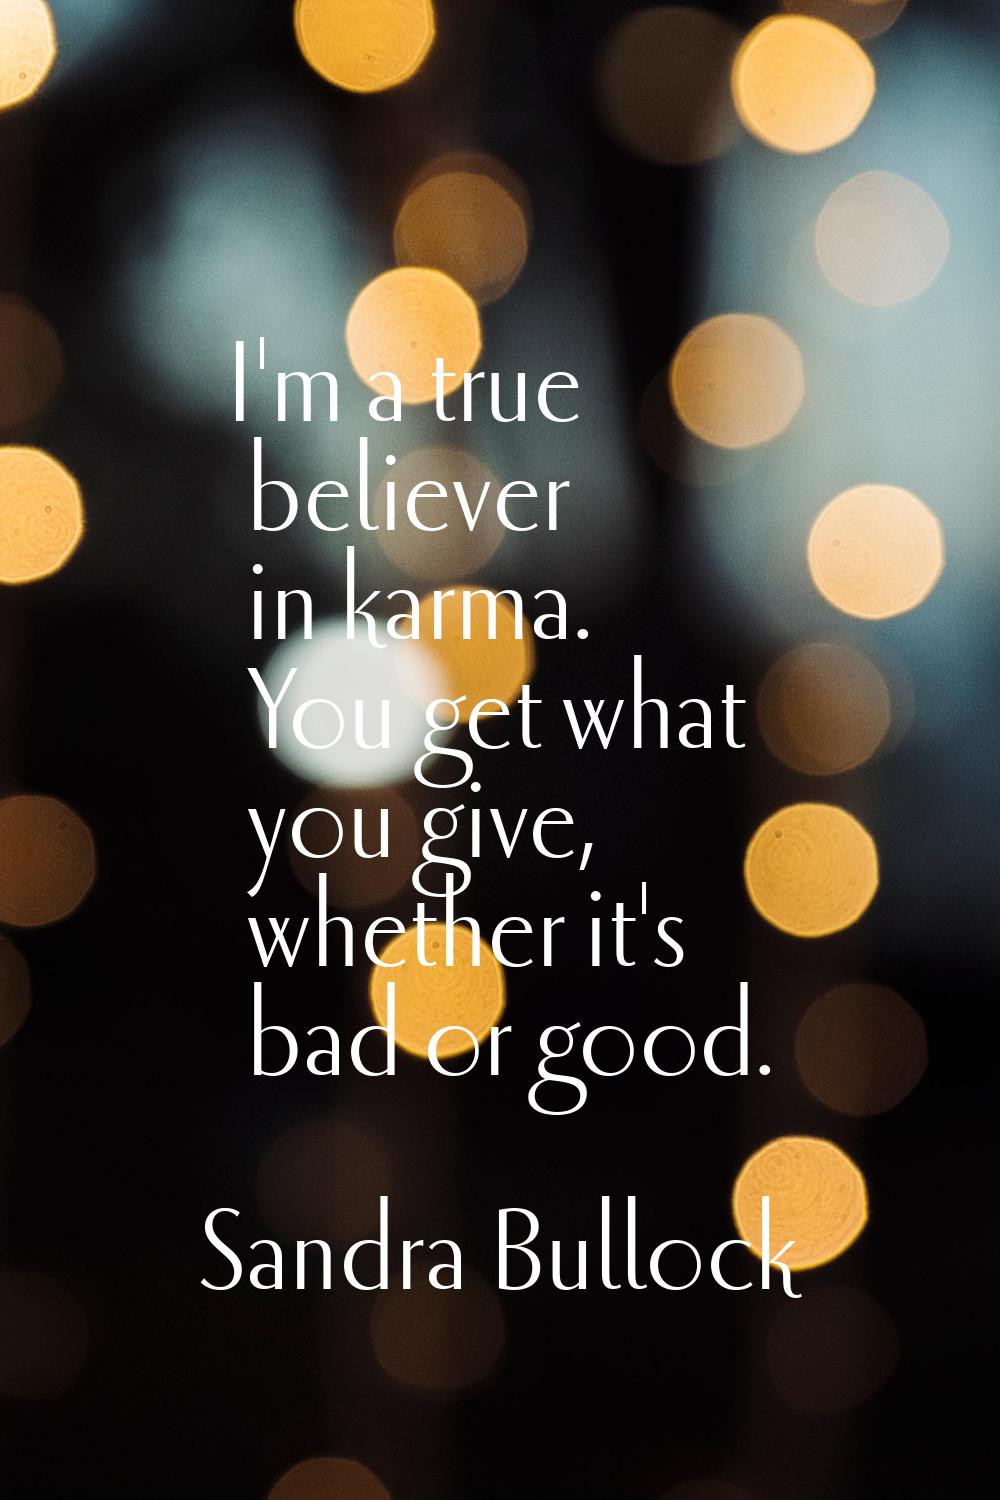 I'm a true believer in karma. You get what you give, whether it's bad or good.